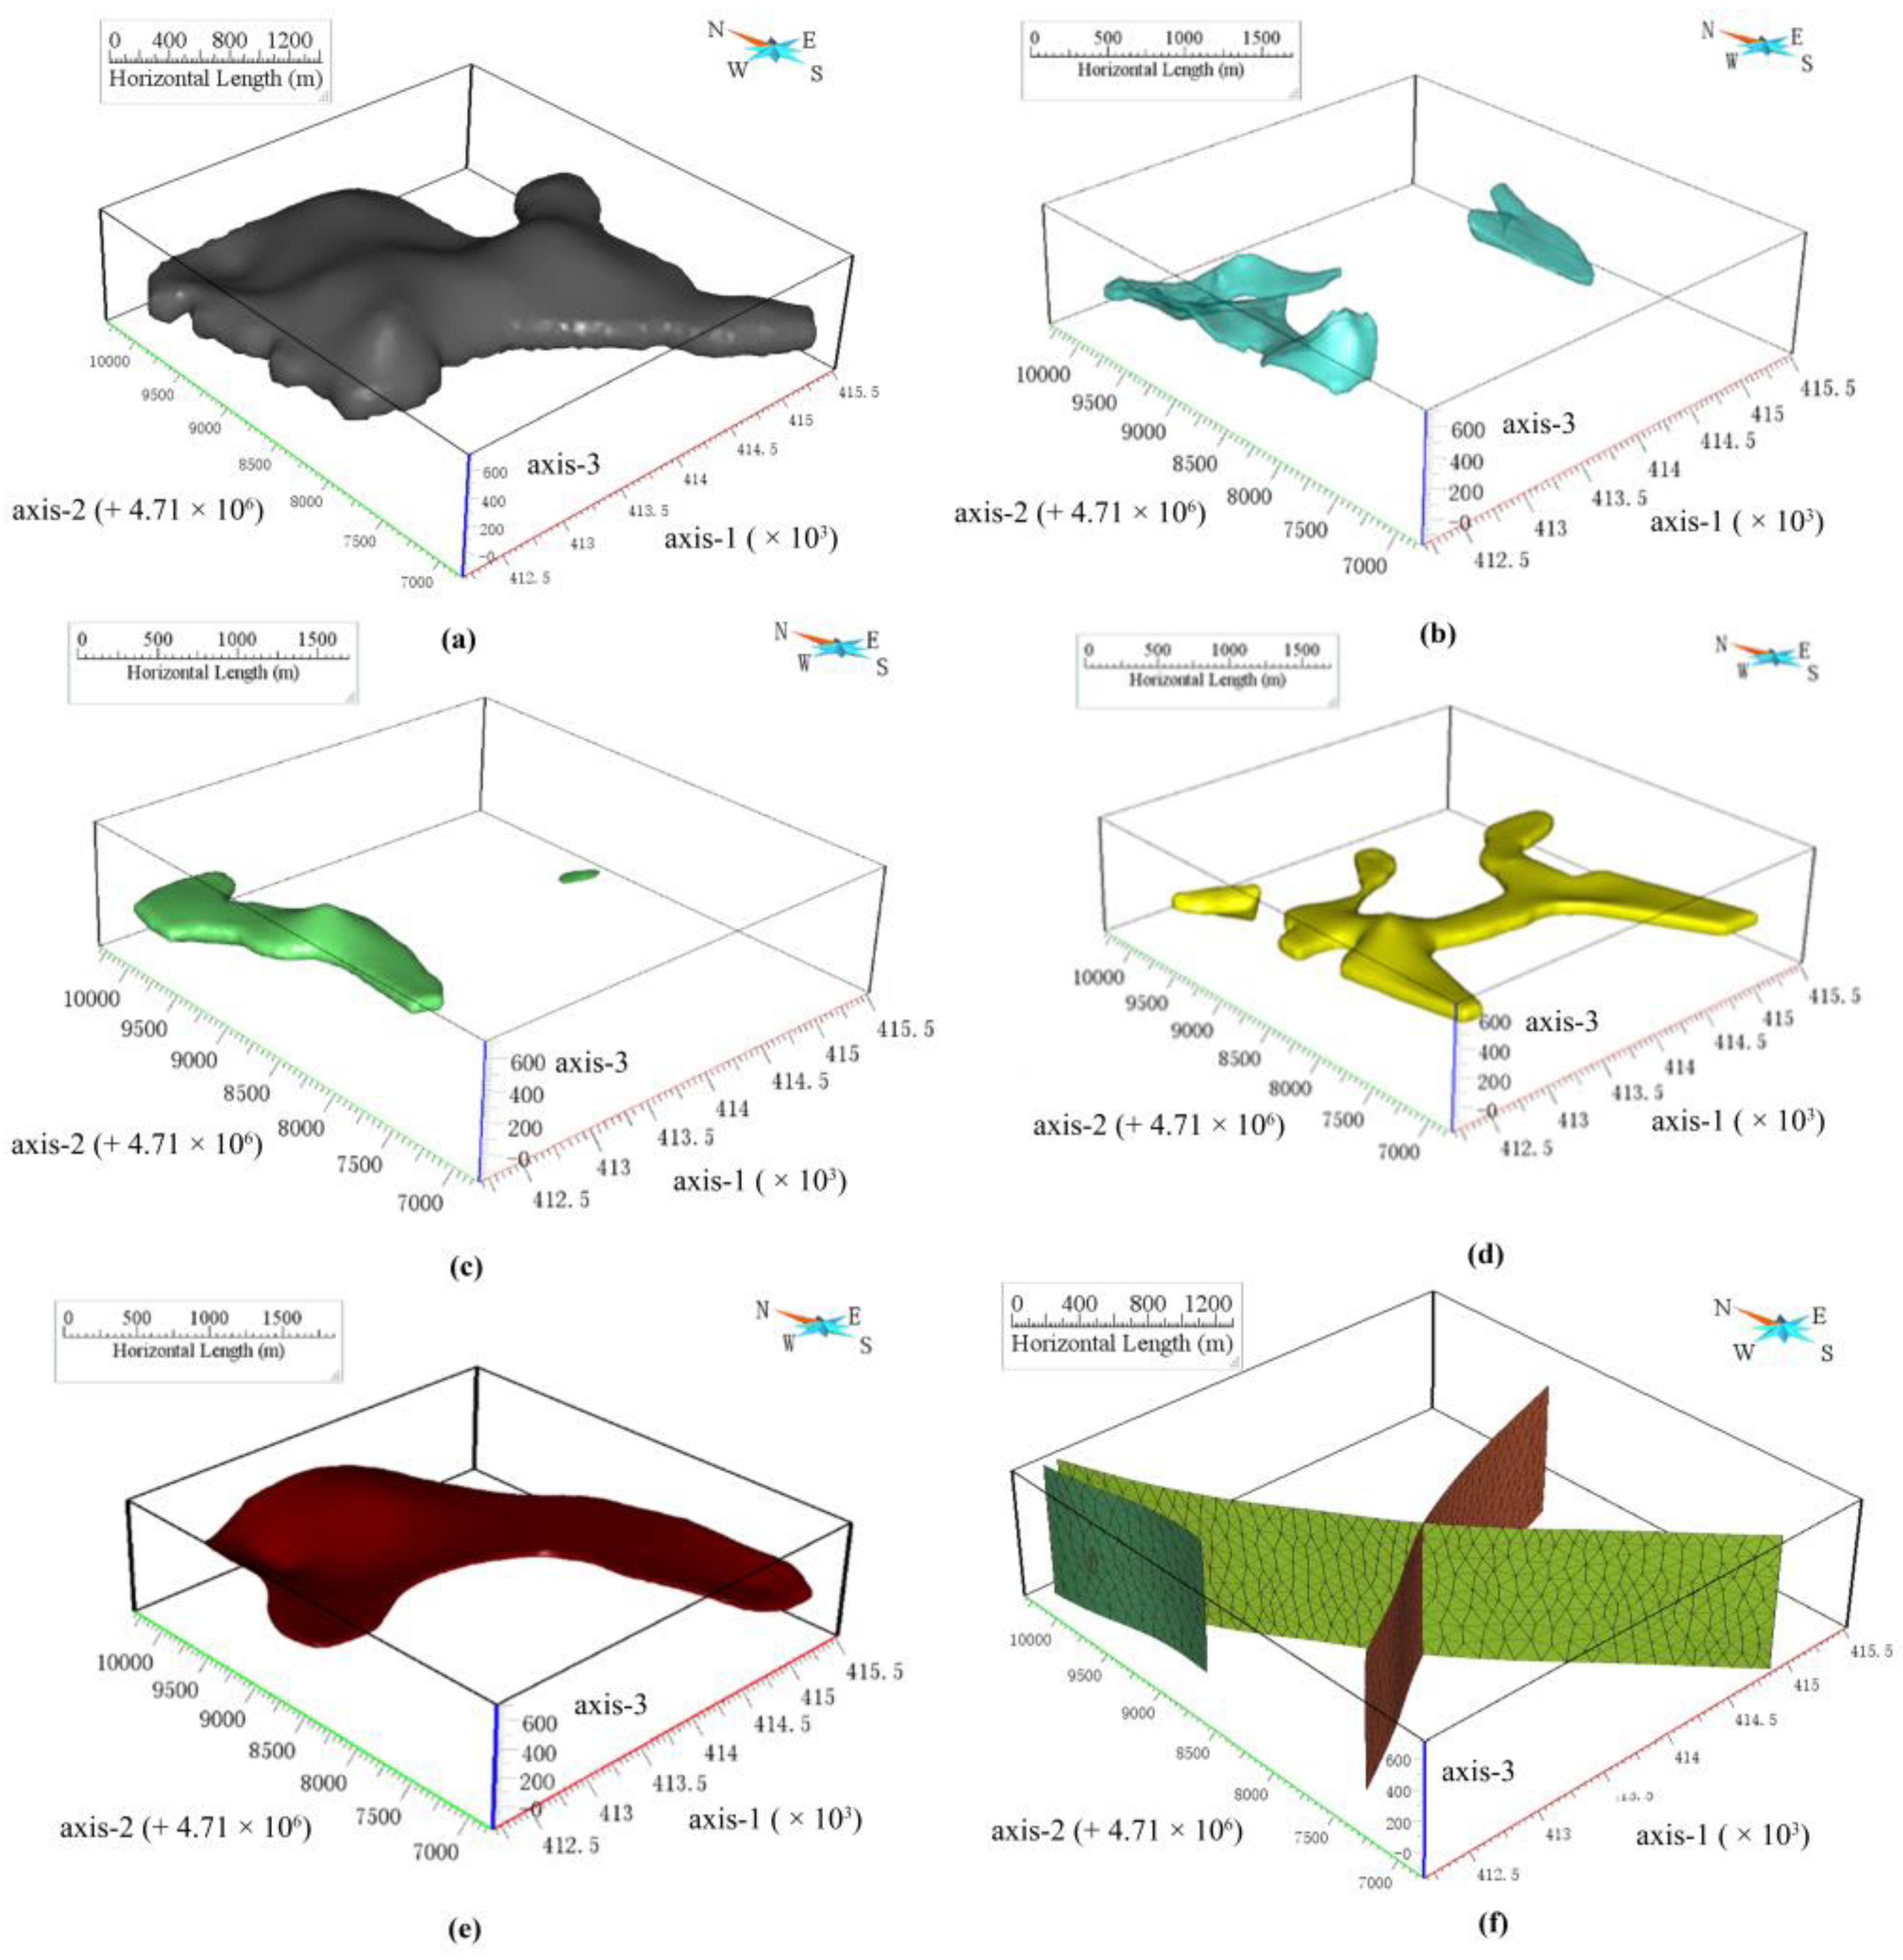 Three-Dimensional Mineral Prospectivity Modeling with Geometric